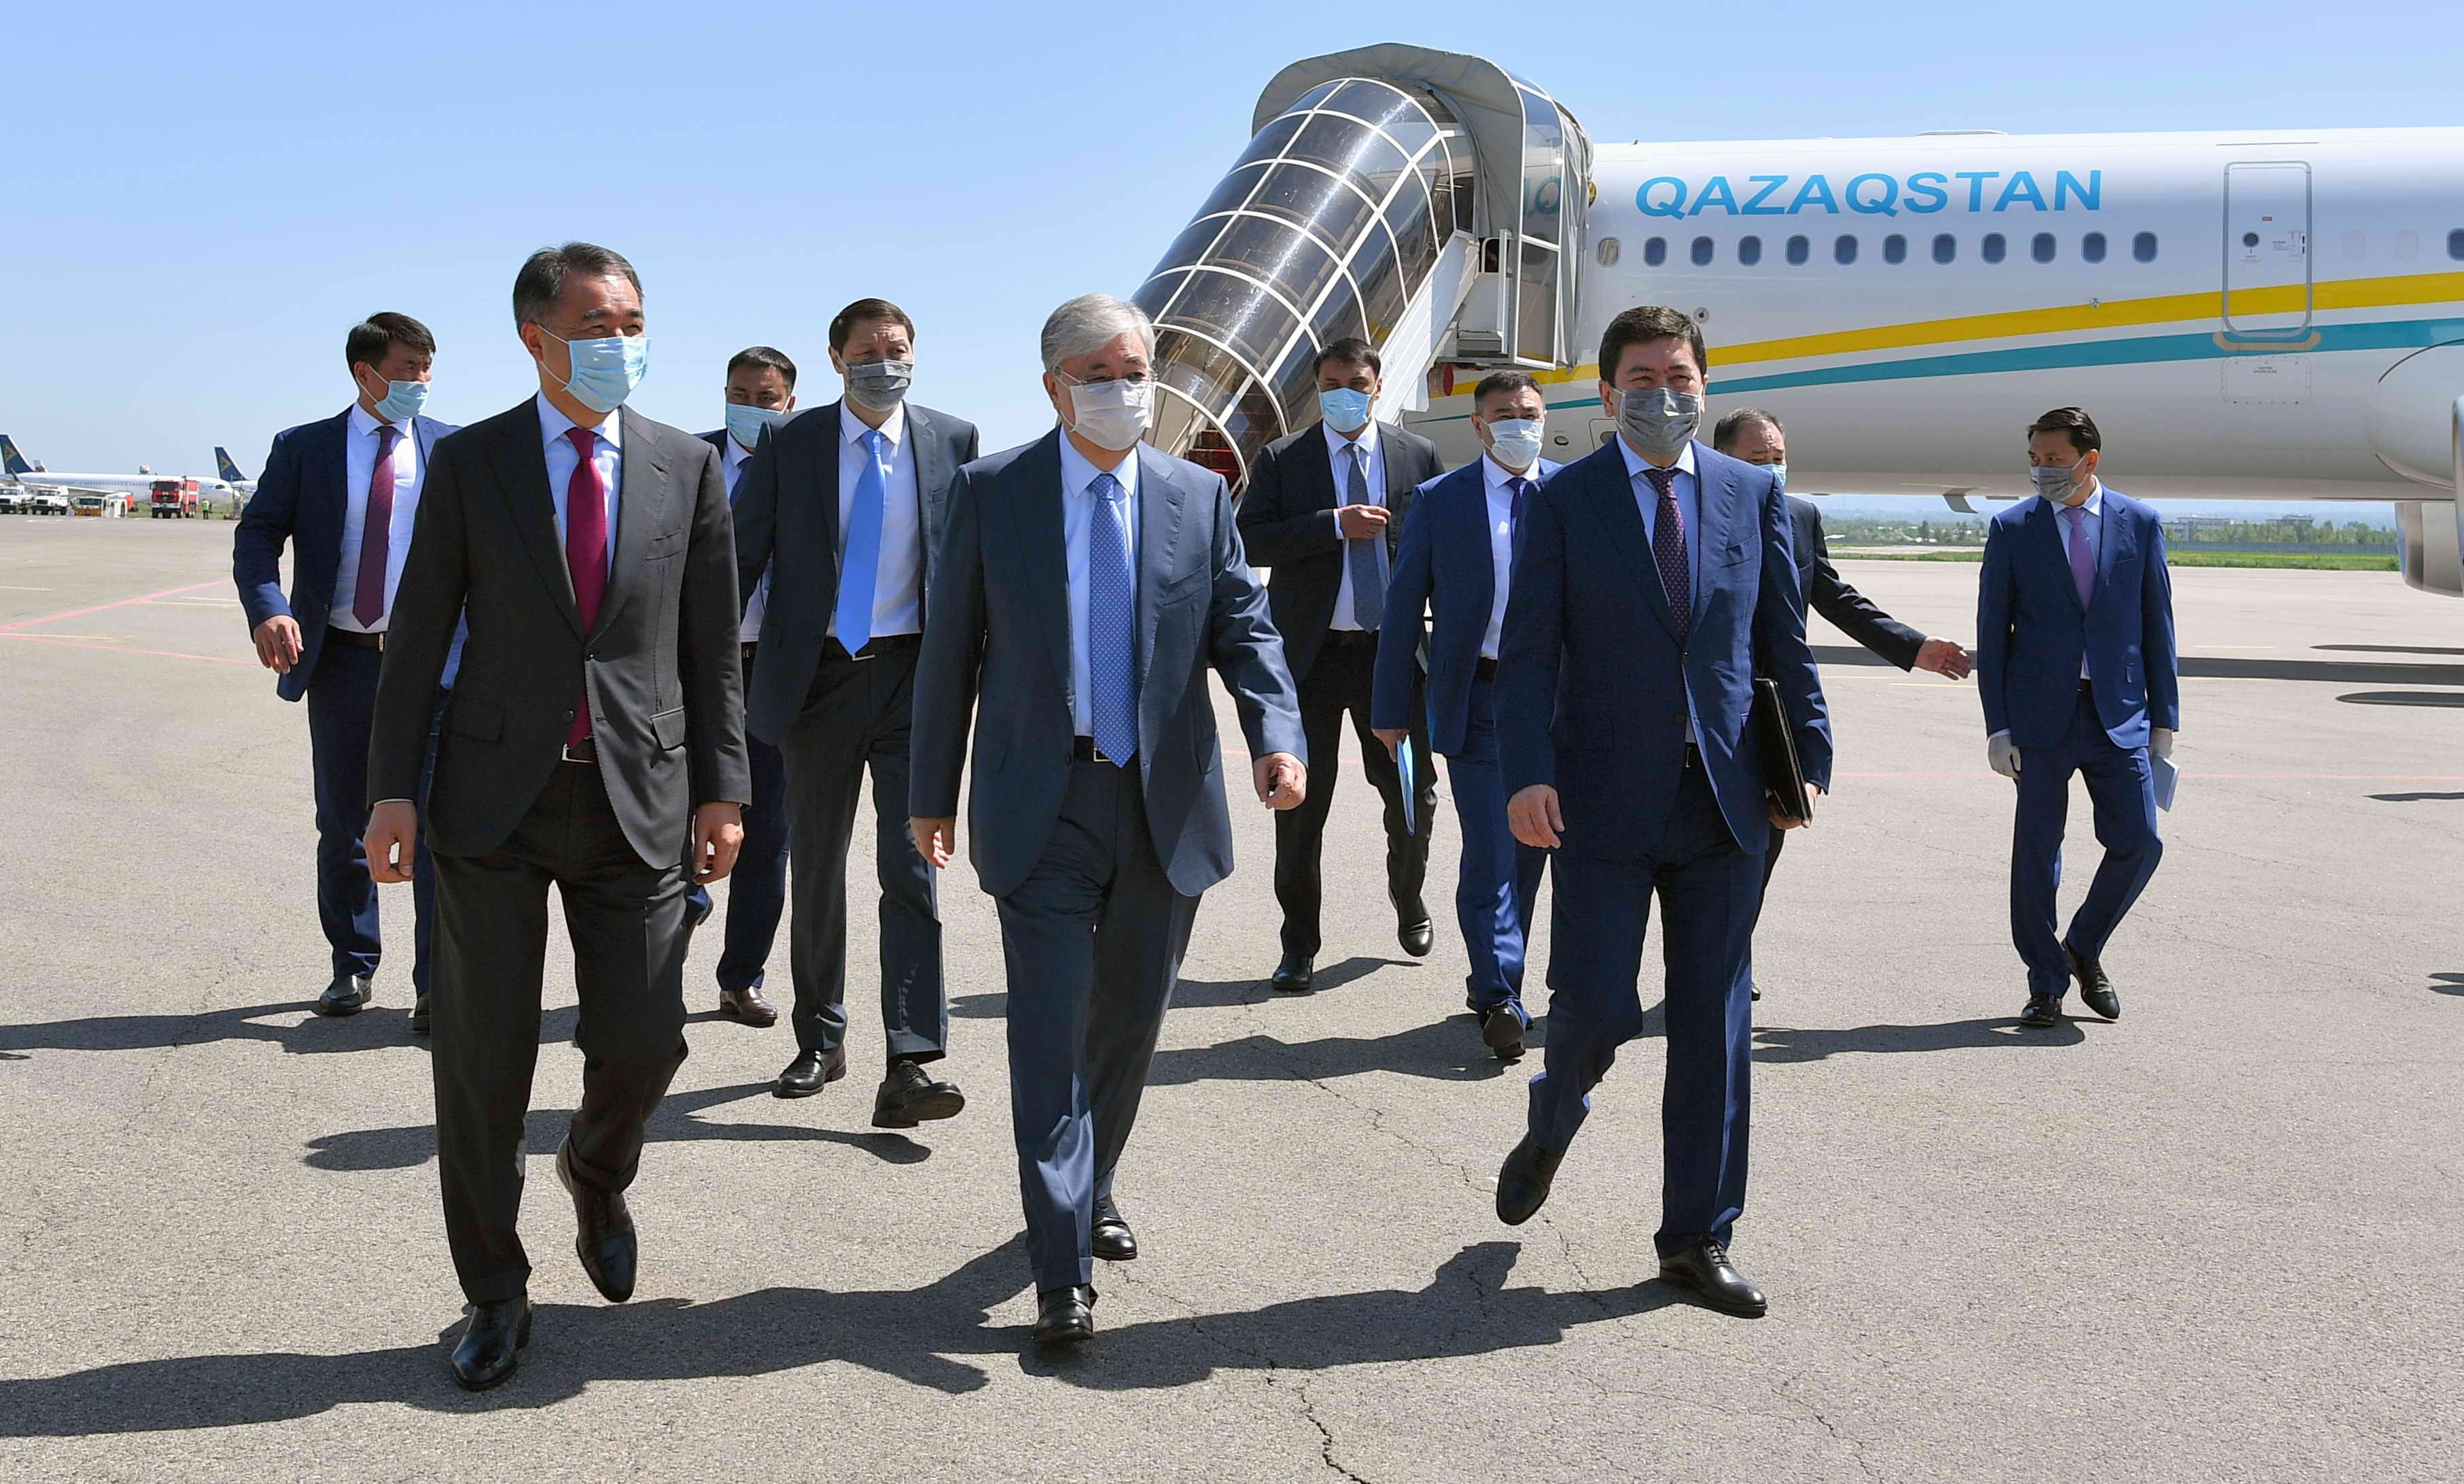 Kassym-Jomart Tokayev presented a number of infrastructure projects in Almaty